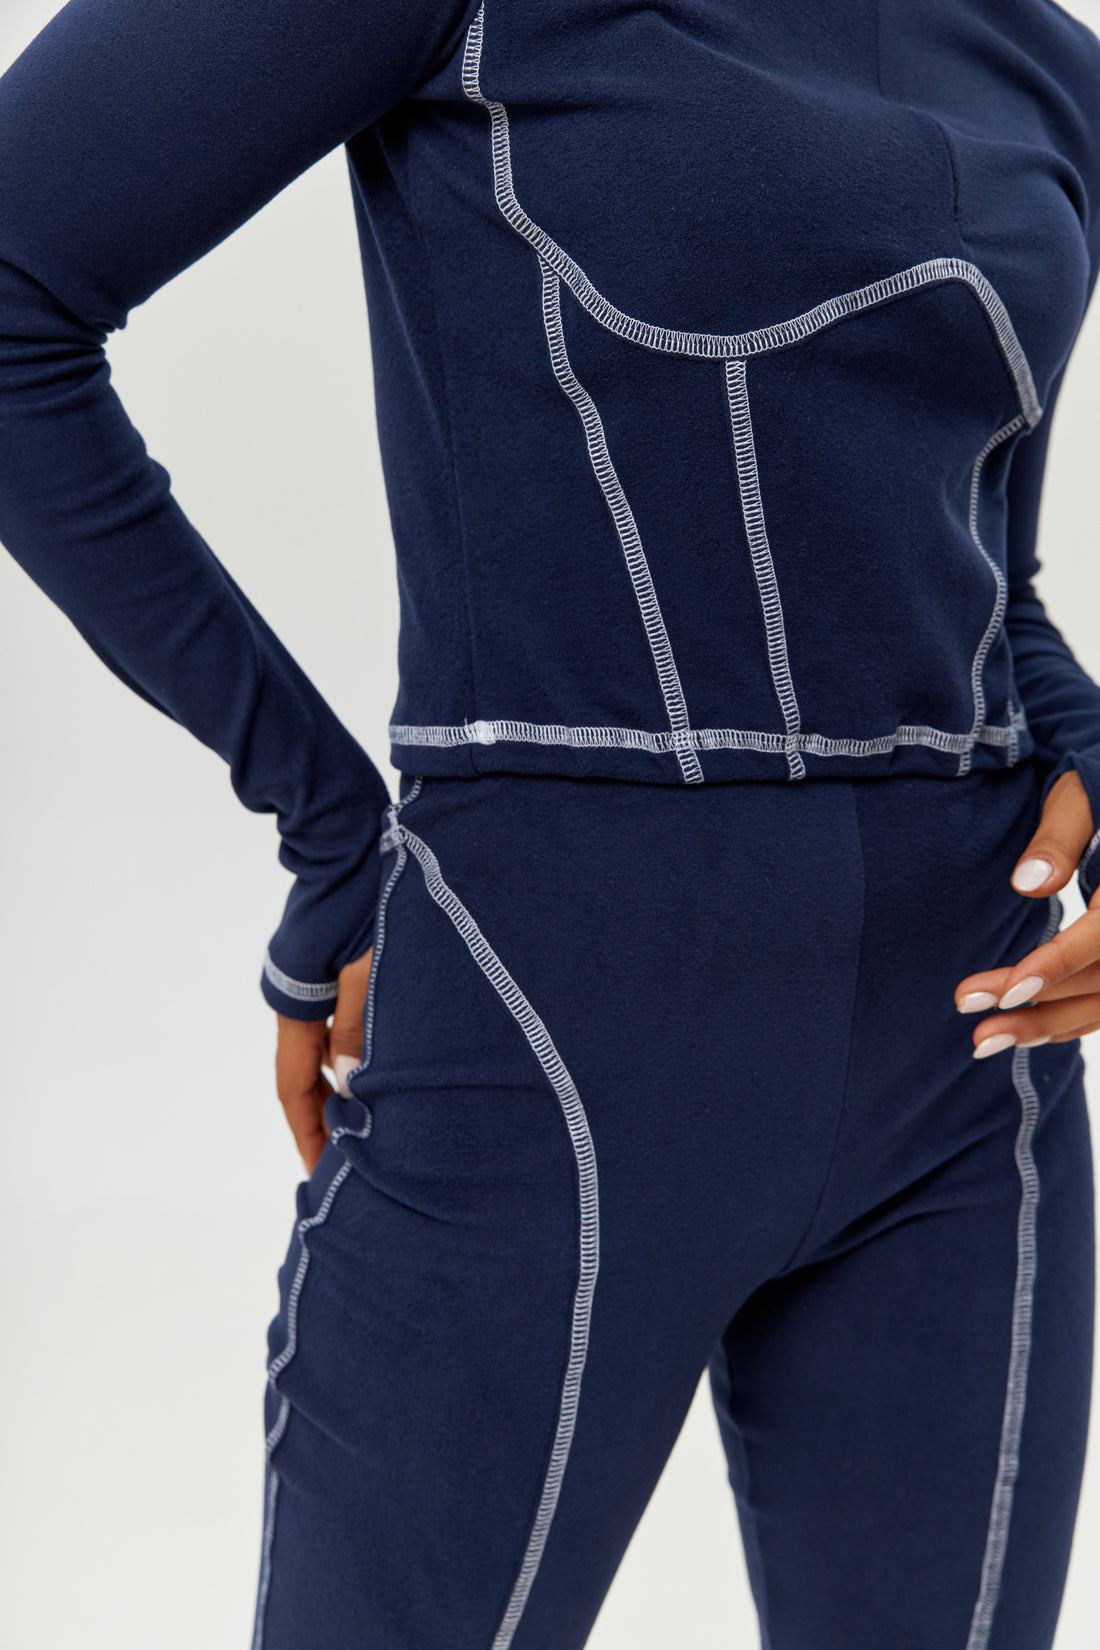 Base layers for skiing women's - Navy blue two piece set for winter - Best thermals for women